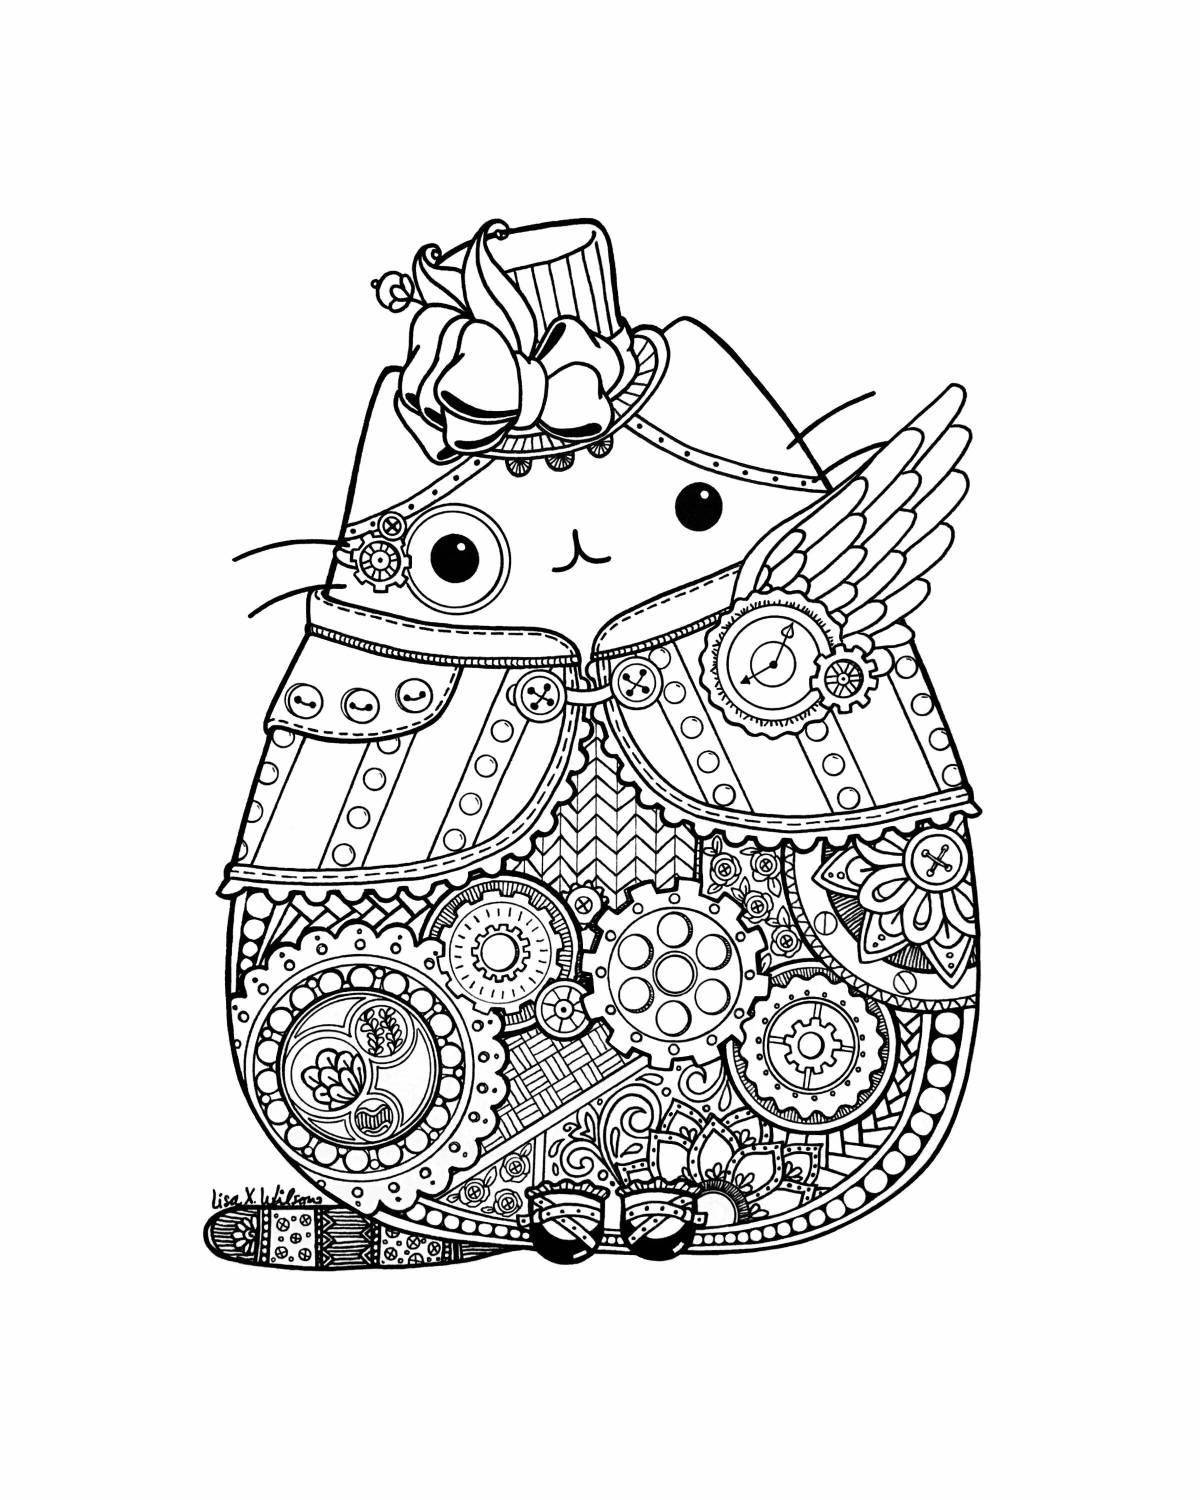 Happy pusheen coloring page